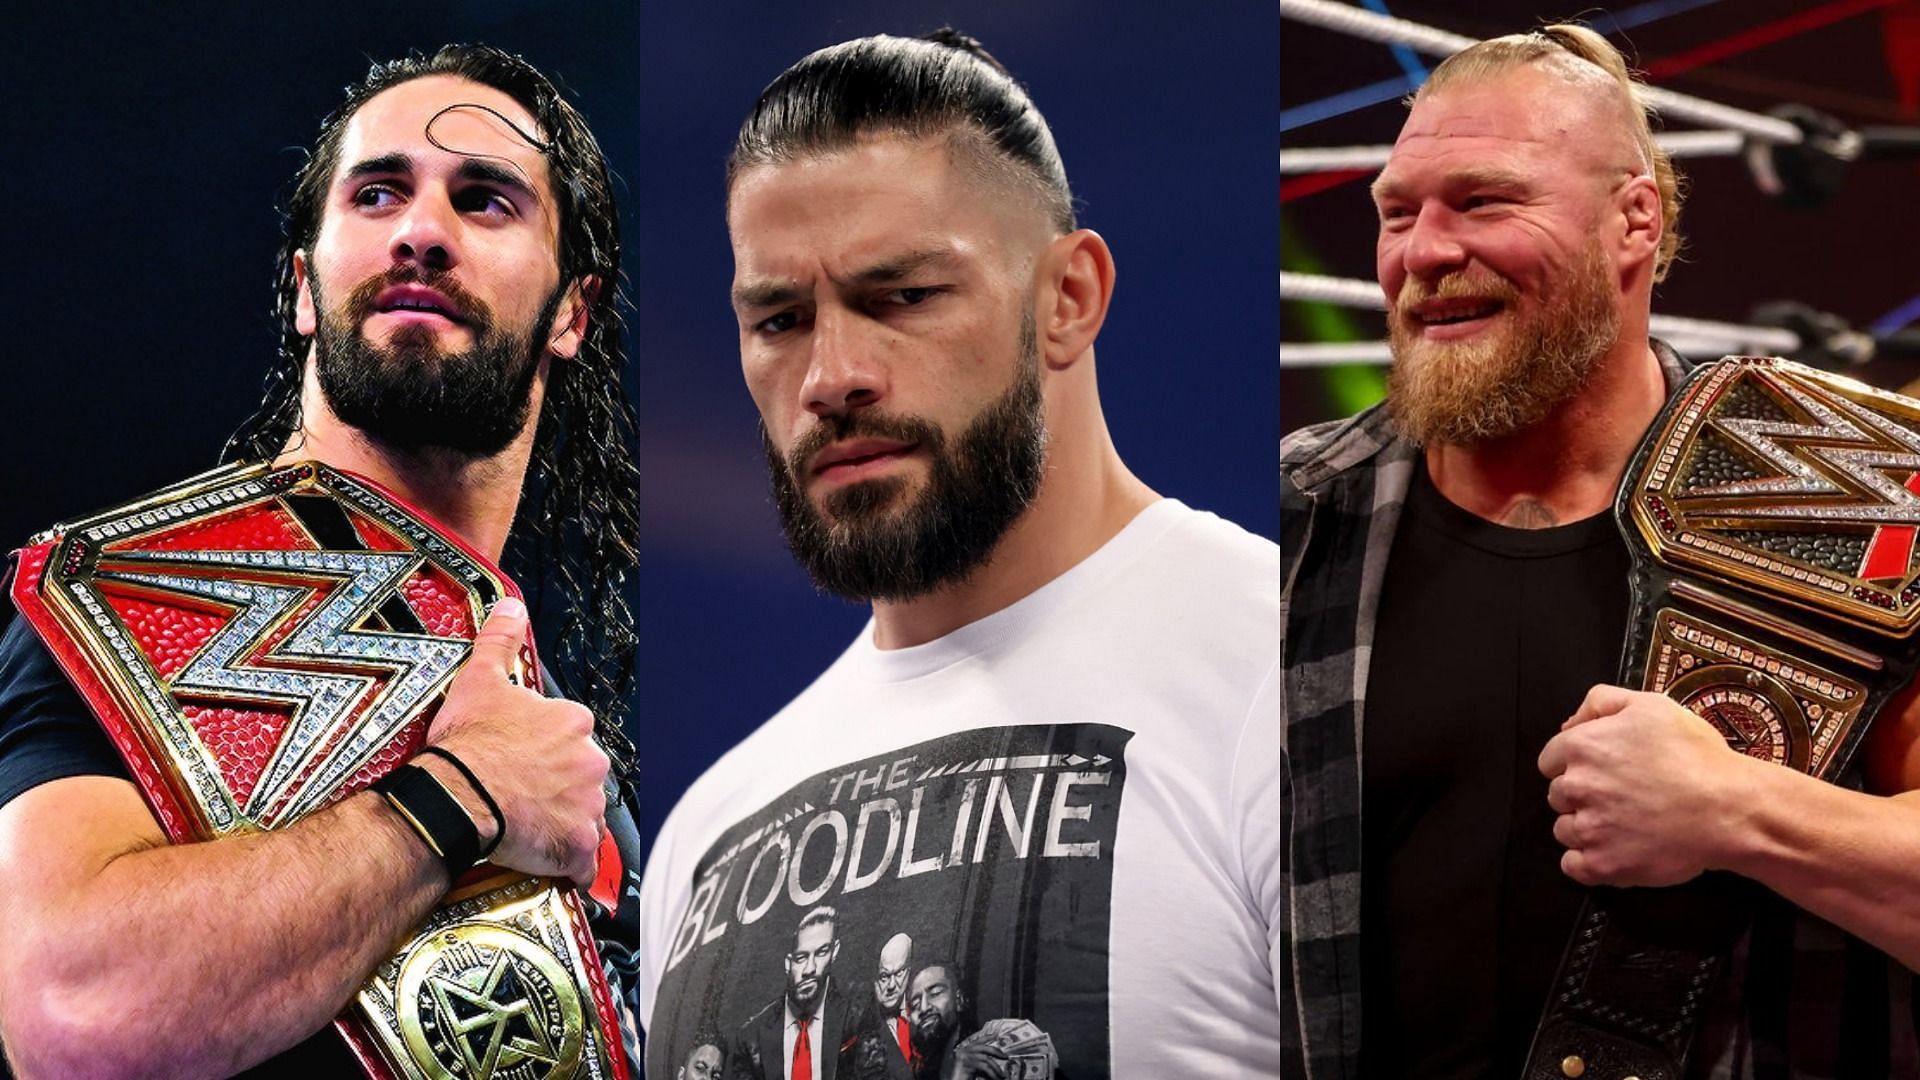 Seth Rollins (left); Roman Reigns (middle); Brock Lesnar (right)